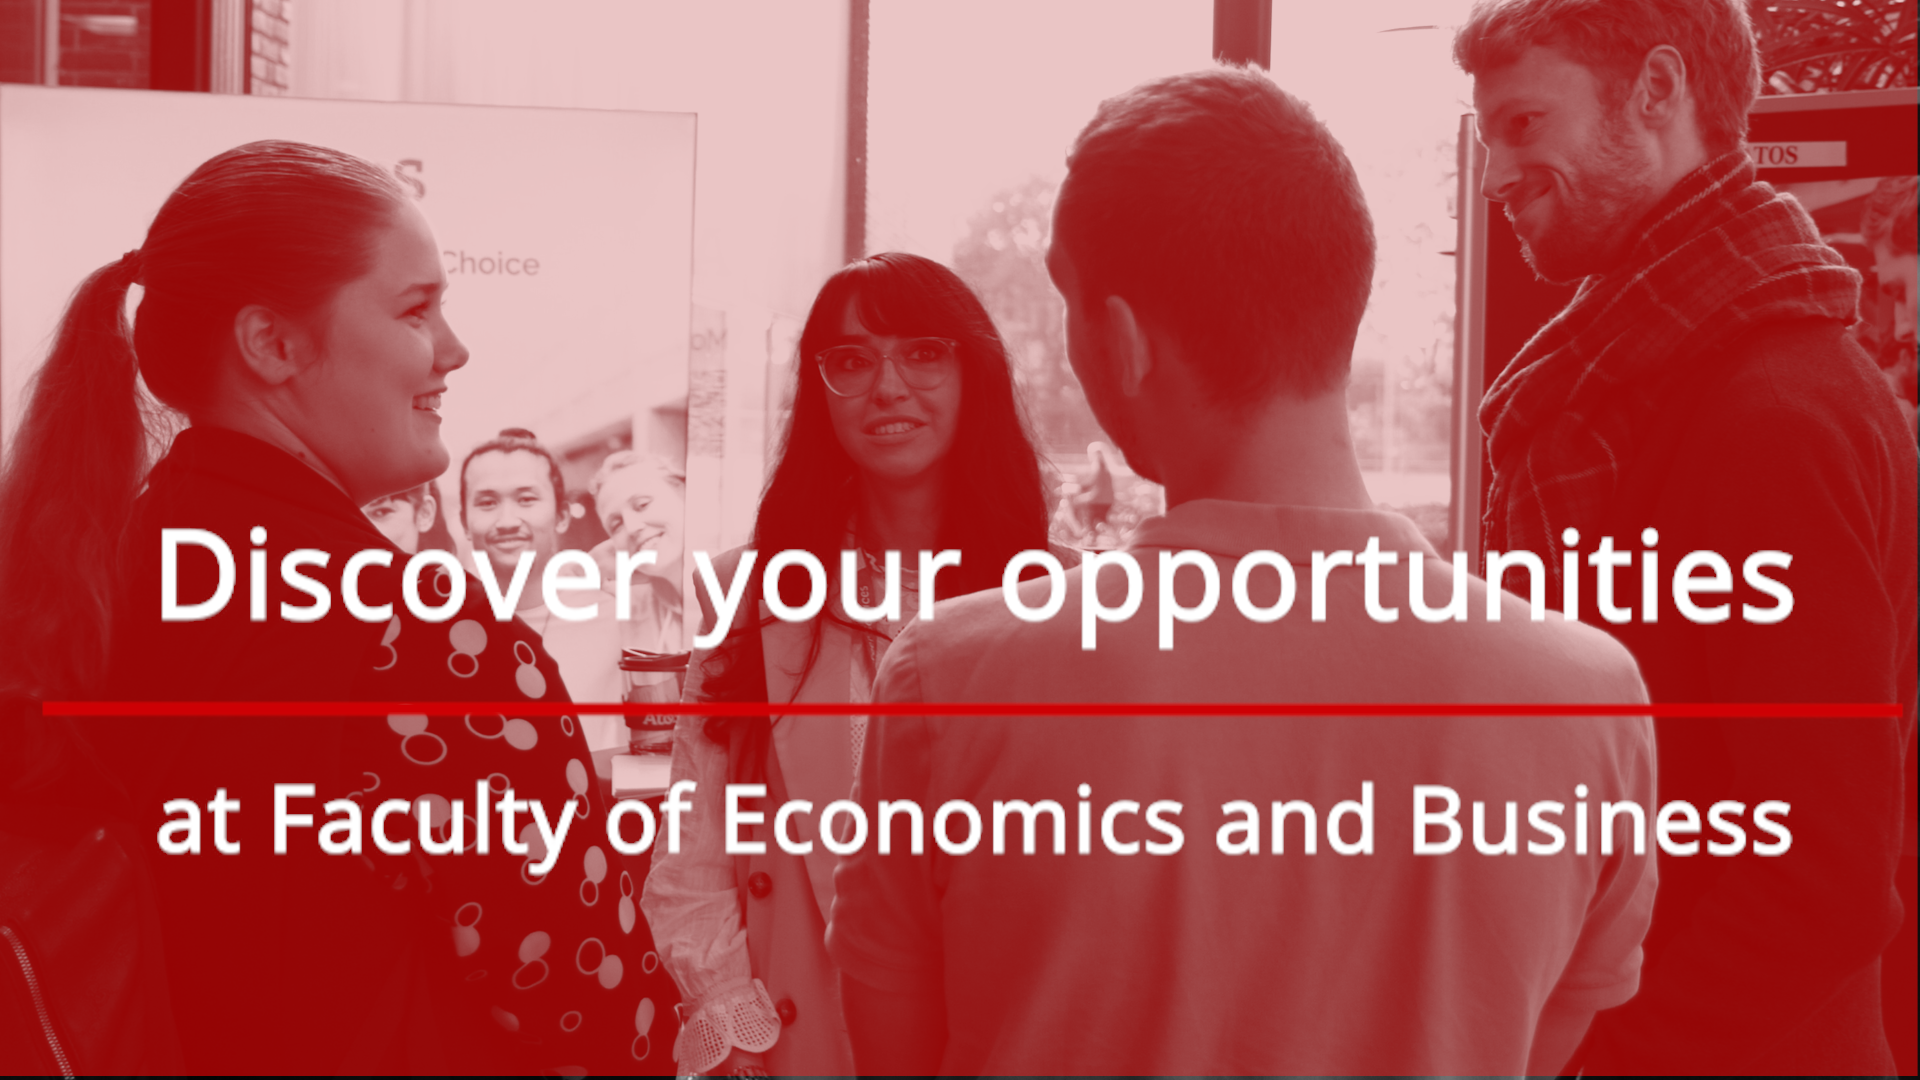 Discover your opportunities at the Faculty of Economics and Business